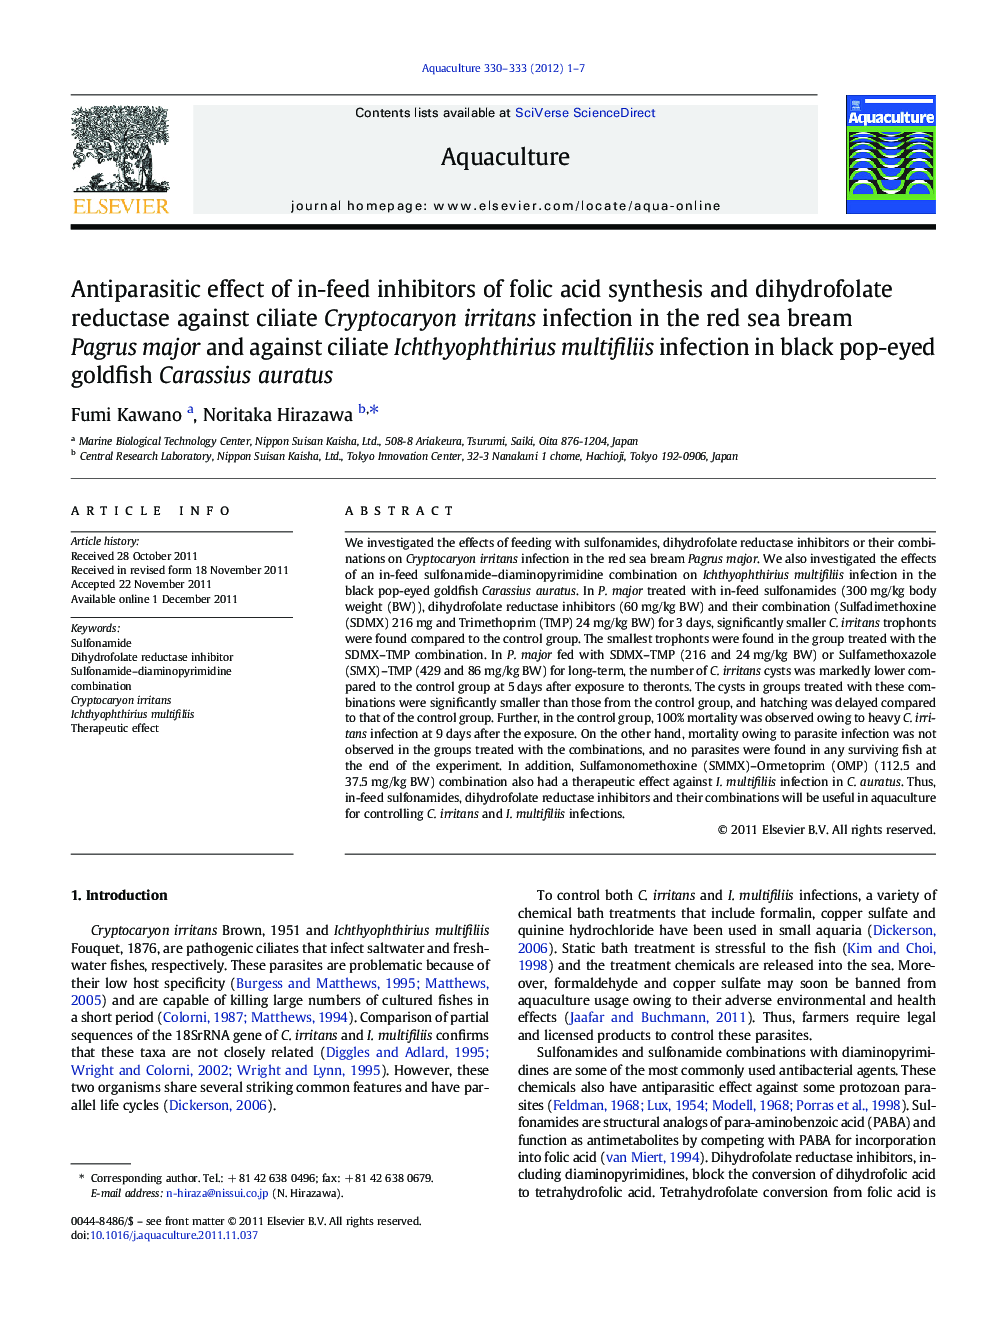 Antiparasitic effect of in-feed inhibitors of folic acid synthesis and dihydrofolate reductase against ciliate Cryptocaryon irritans infection in the red sea bream Pagrus major and against ciliate Ichthyophthirius multifiliis infection in black pop-eyed g